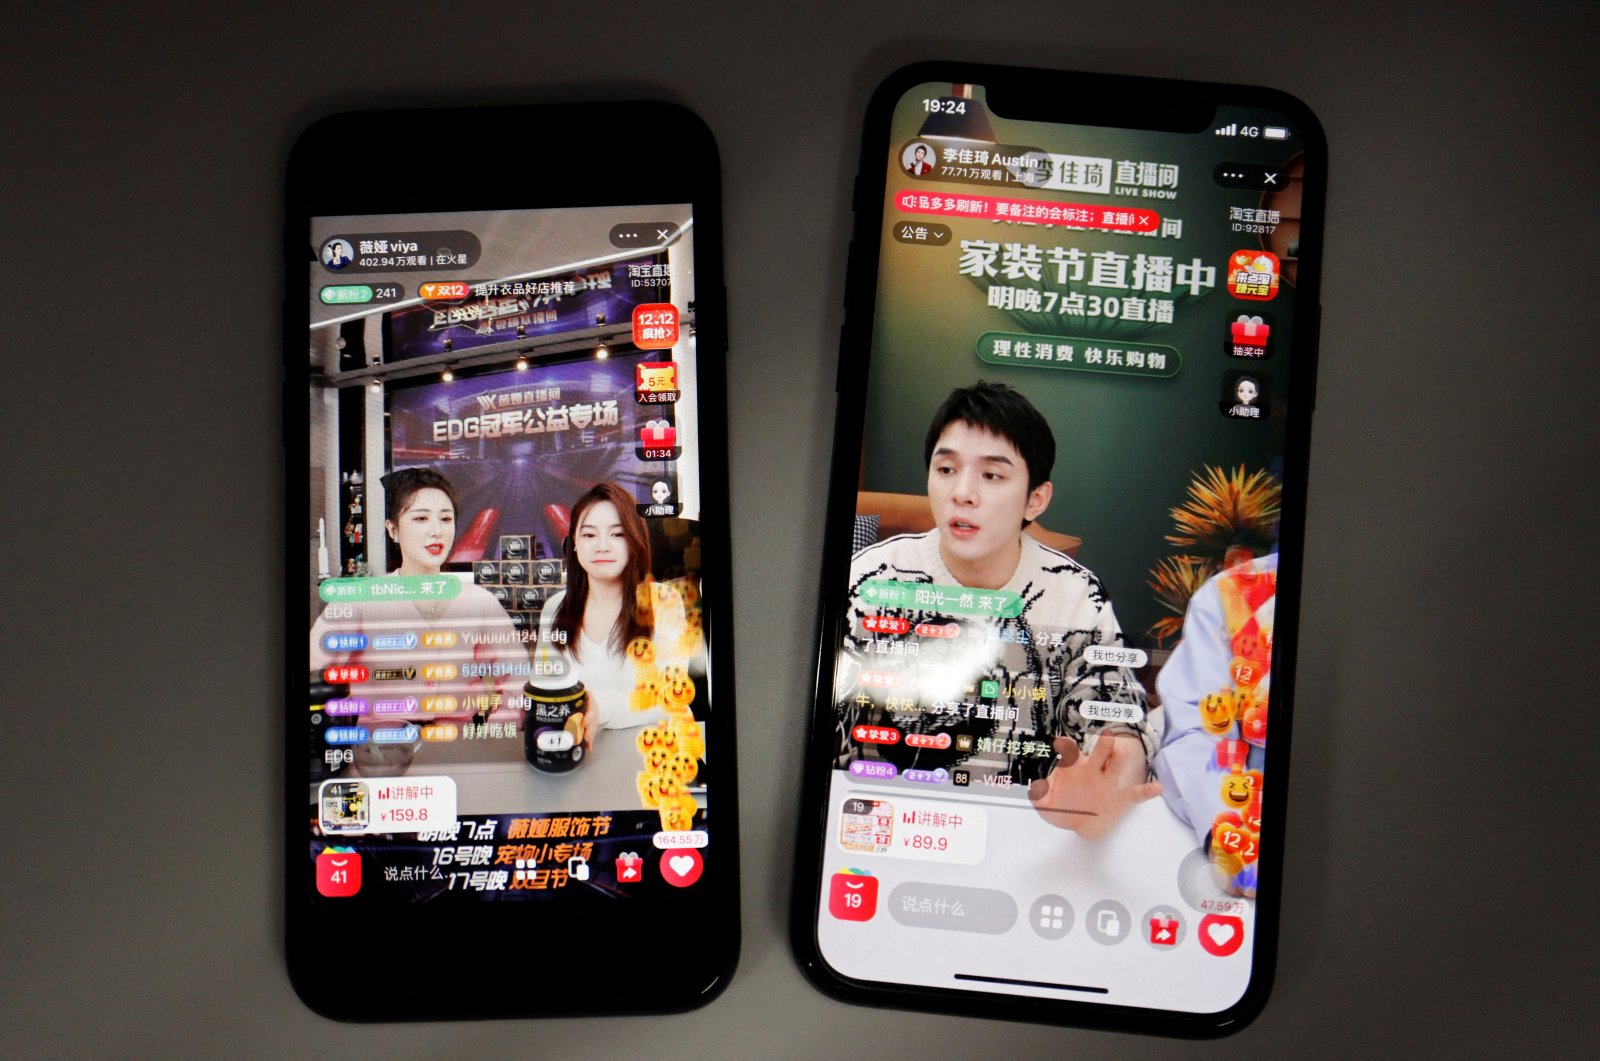 Livestreaming sessions by Chinese livestreamers Li Jiaqi and Viya, whose real name is Huang Wei (L), are seen on Alibaba&#039;s e-commerce app Taobao displayed on mobile phones in this illustration picture taken Dec. 14, 2021. (Reuters Photo)